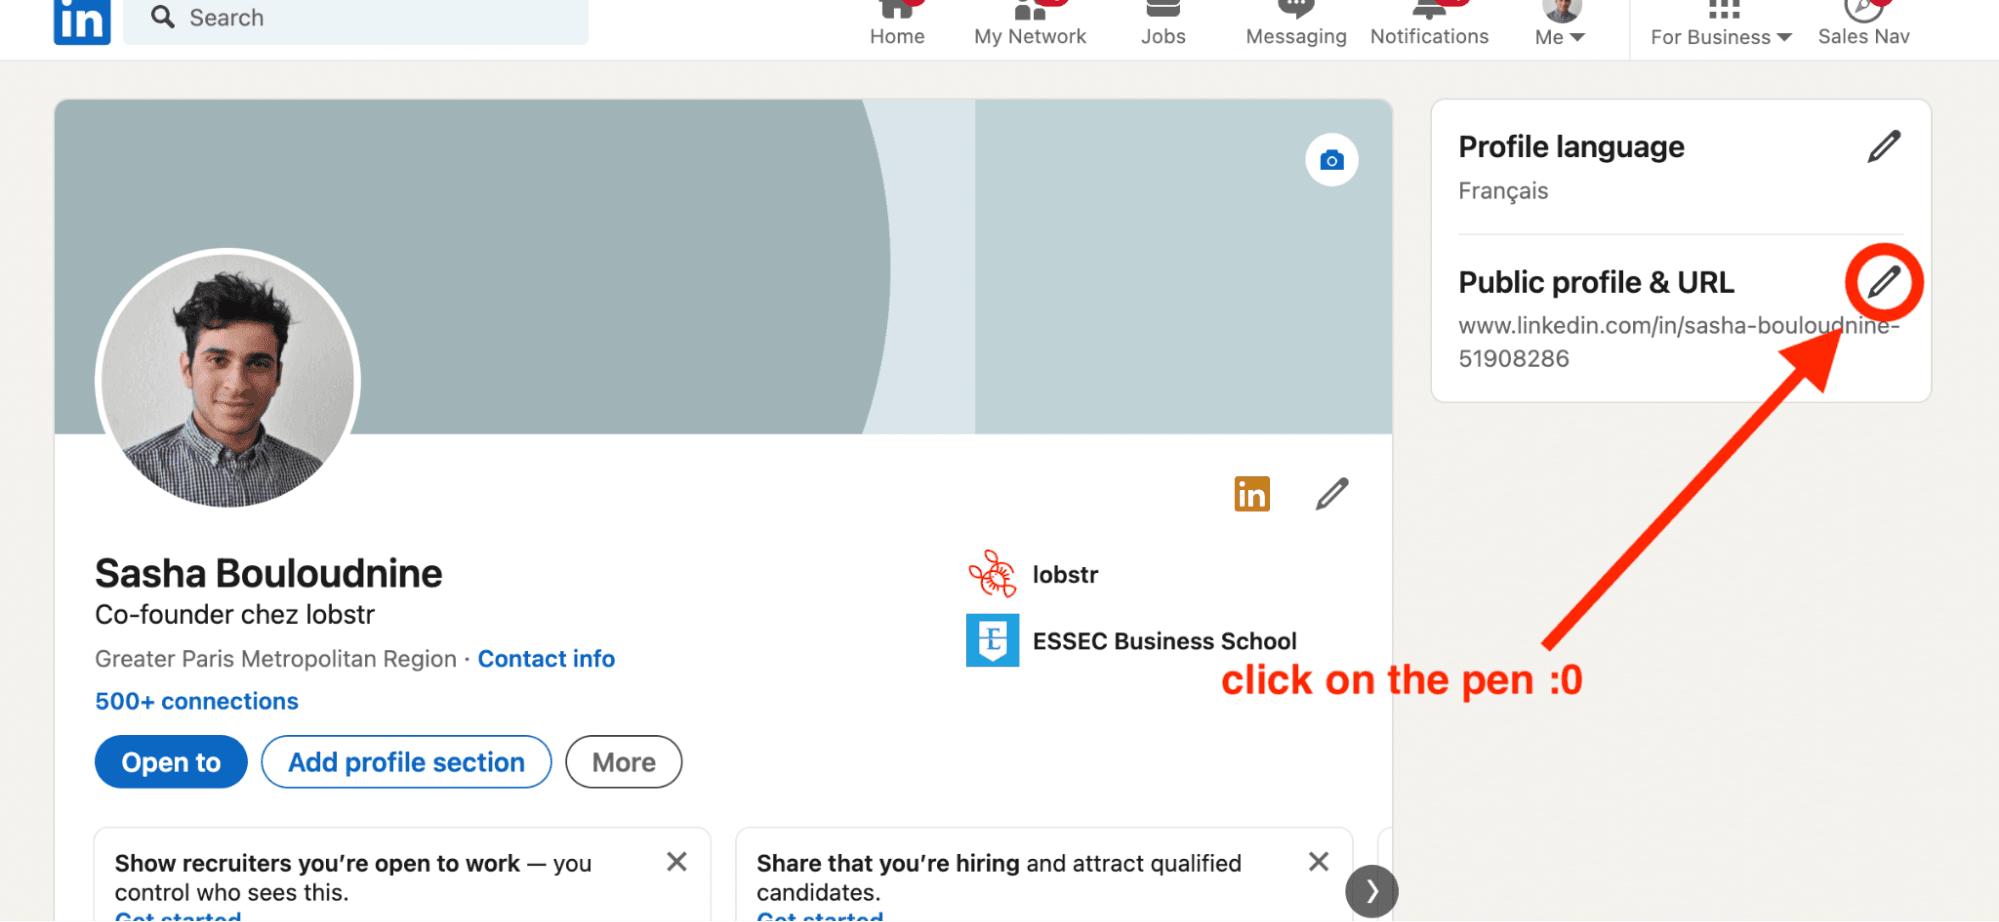 click on the blue top right pencil icon to update your linkedin url - image7.png